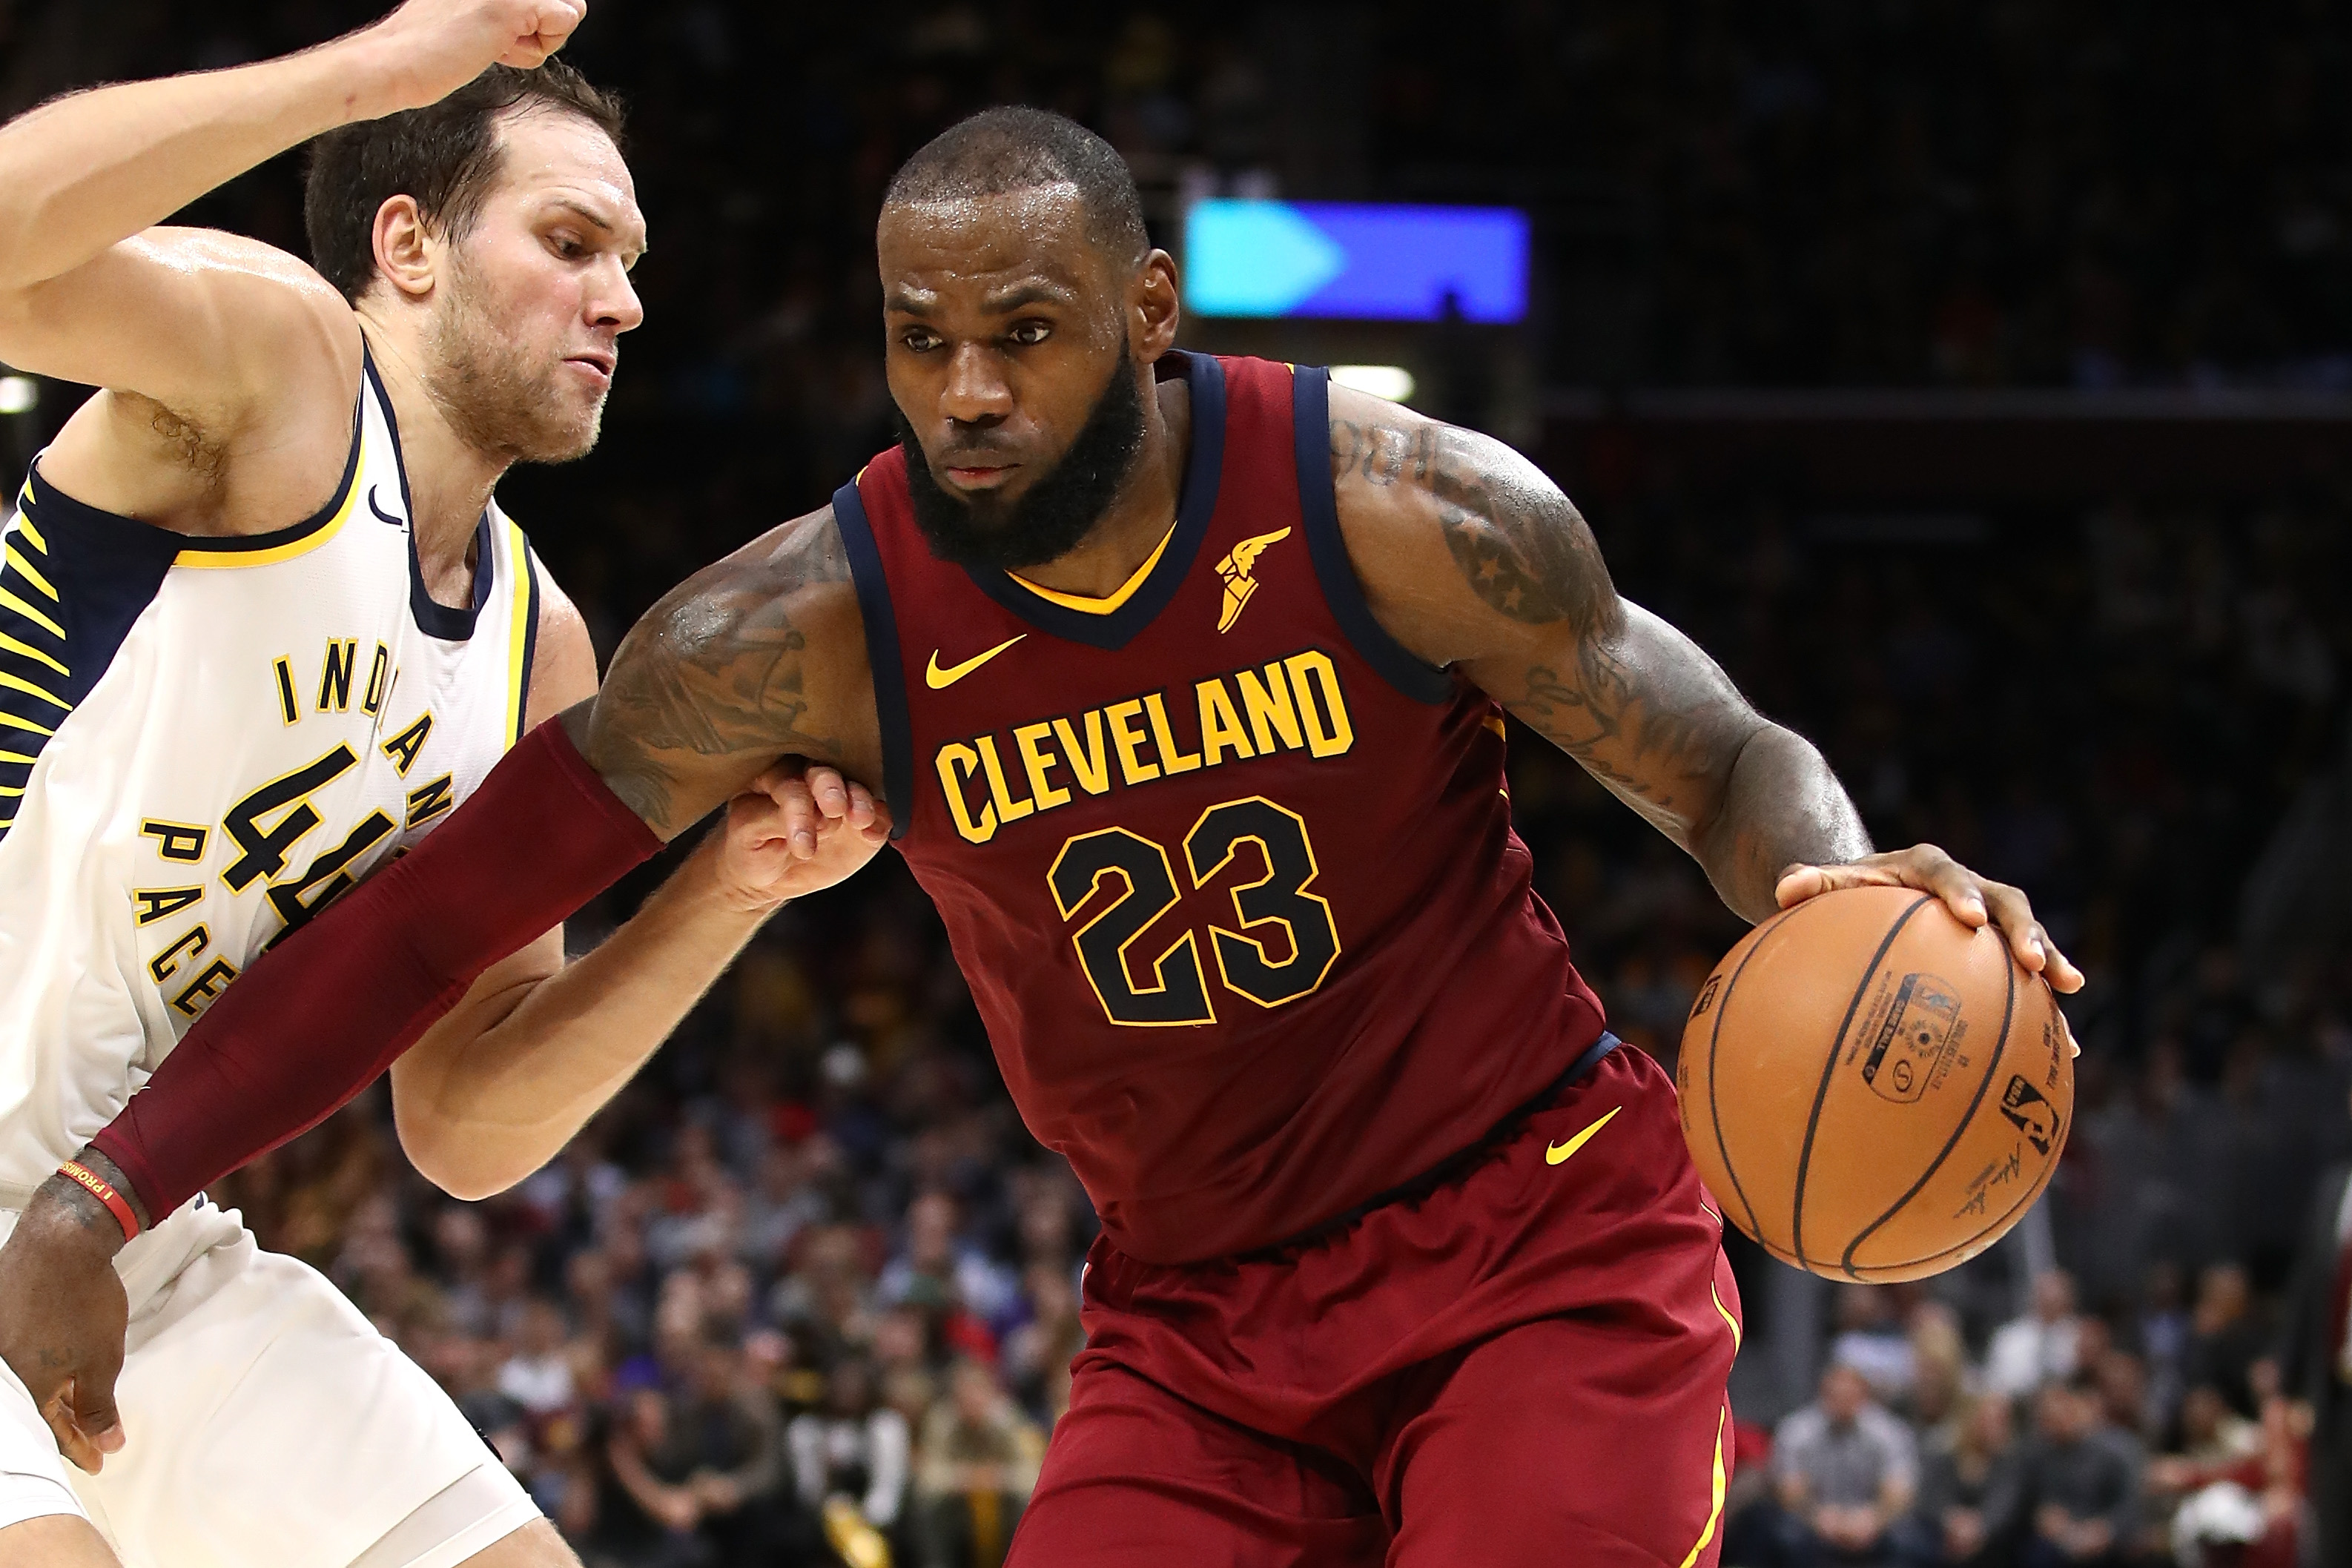 Indiana Pacers vs Cleveland Cavaliers Live Streams